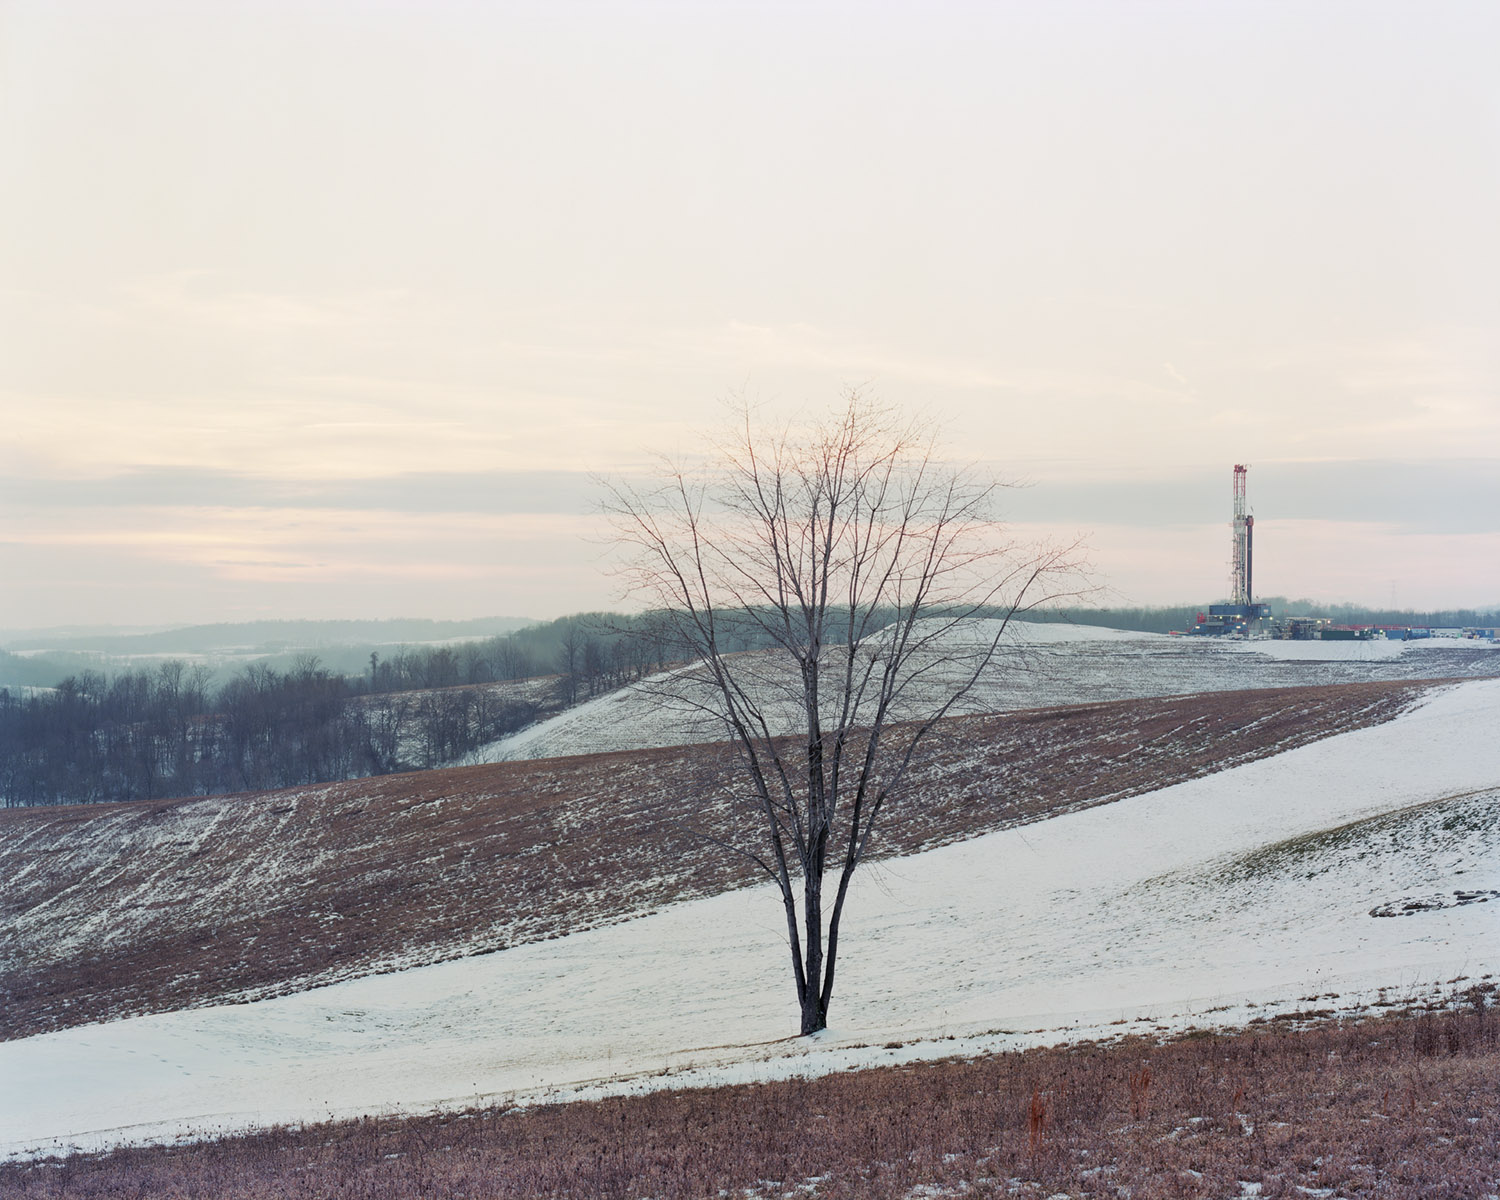  View of a Range Resources gas-drilling rig along Skyline Drive in Hickory, PA on 01/22/2012.&nbsp; © Noah Addis/MSDP 2012 